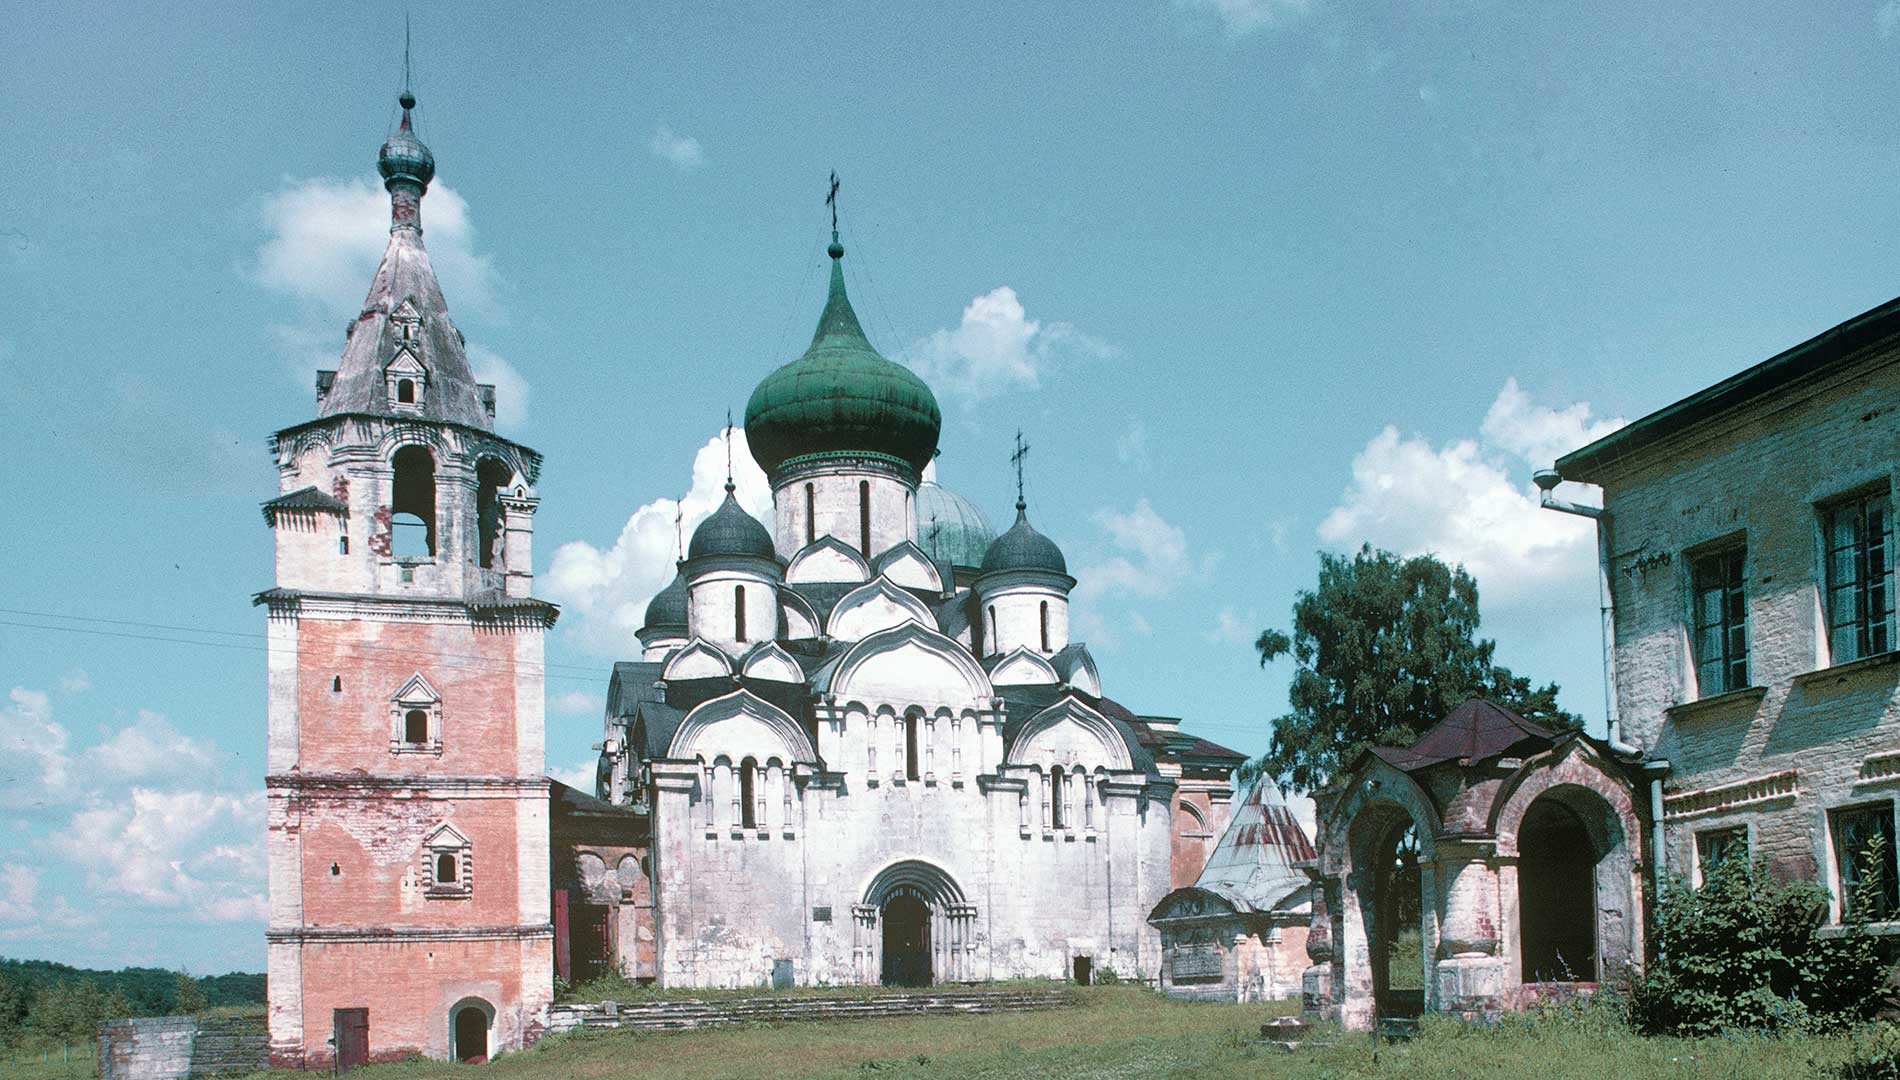 Staritsa. Dormition Monastery, south view. From left: bell tower with Chapel of St. Job; Dormition Cathedral, Ivan Glebov mausoleum, abbot's chambers. July 21, 1997.